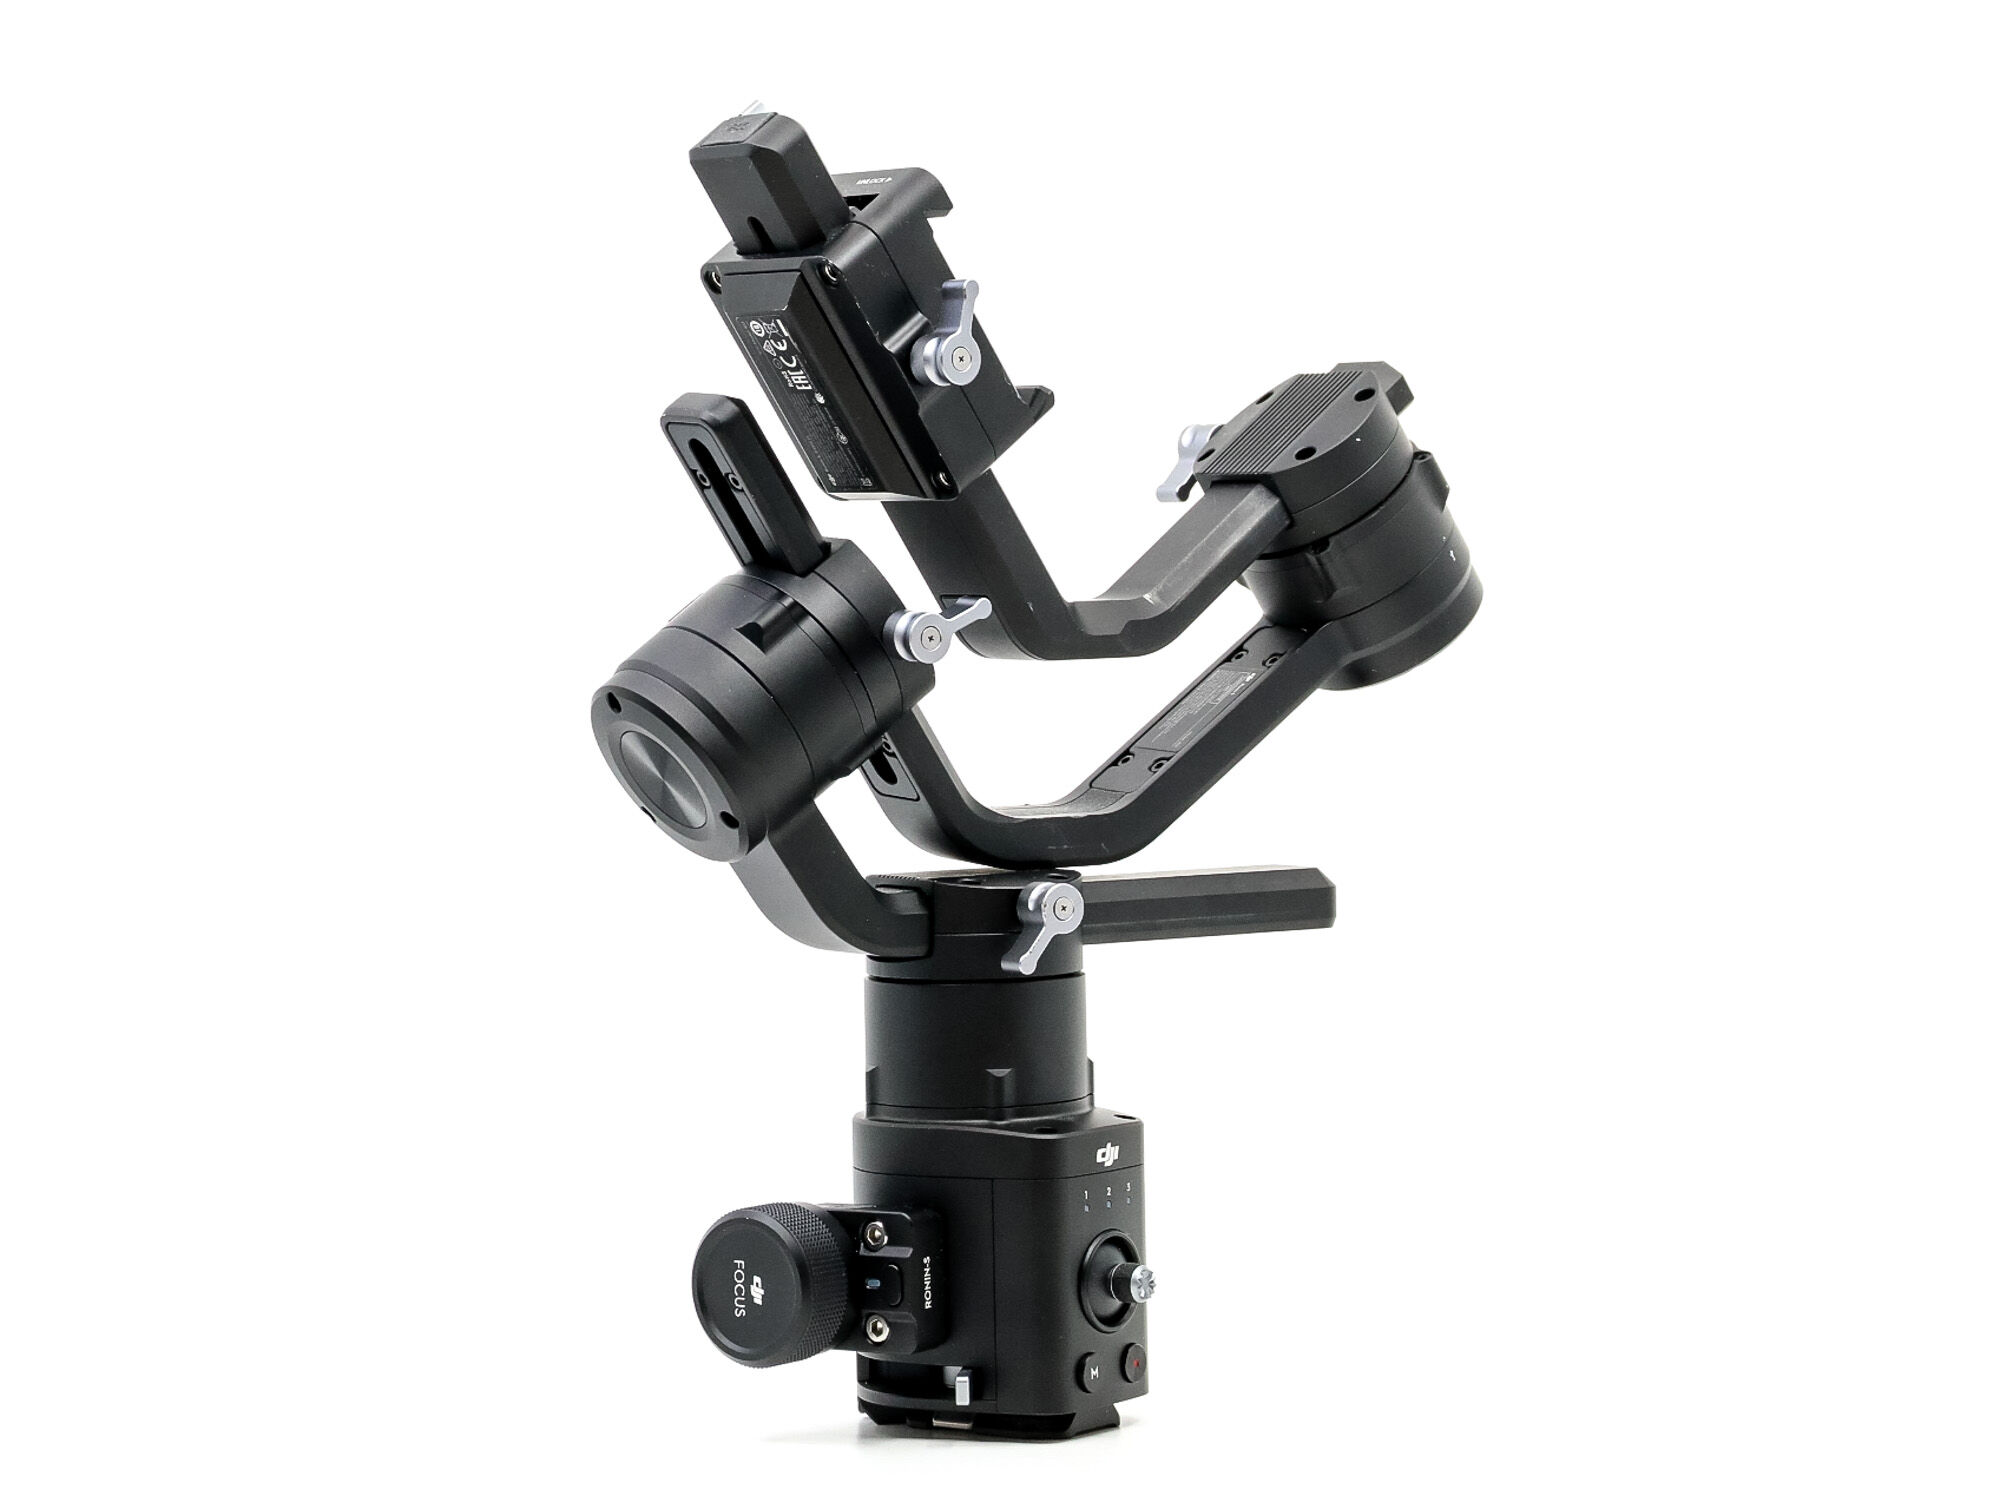 DJI Ronin-S (Condition: Excellent)